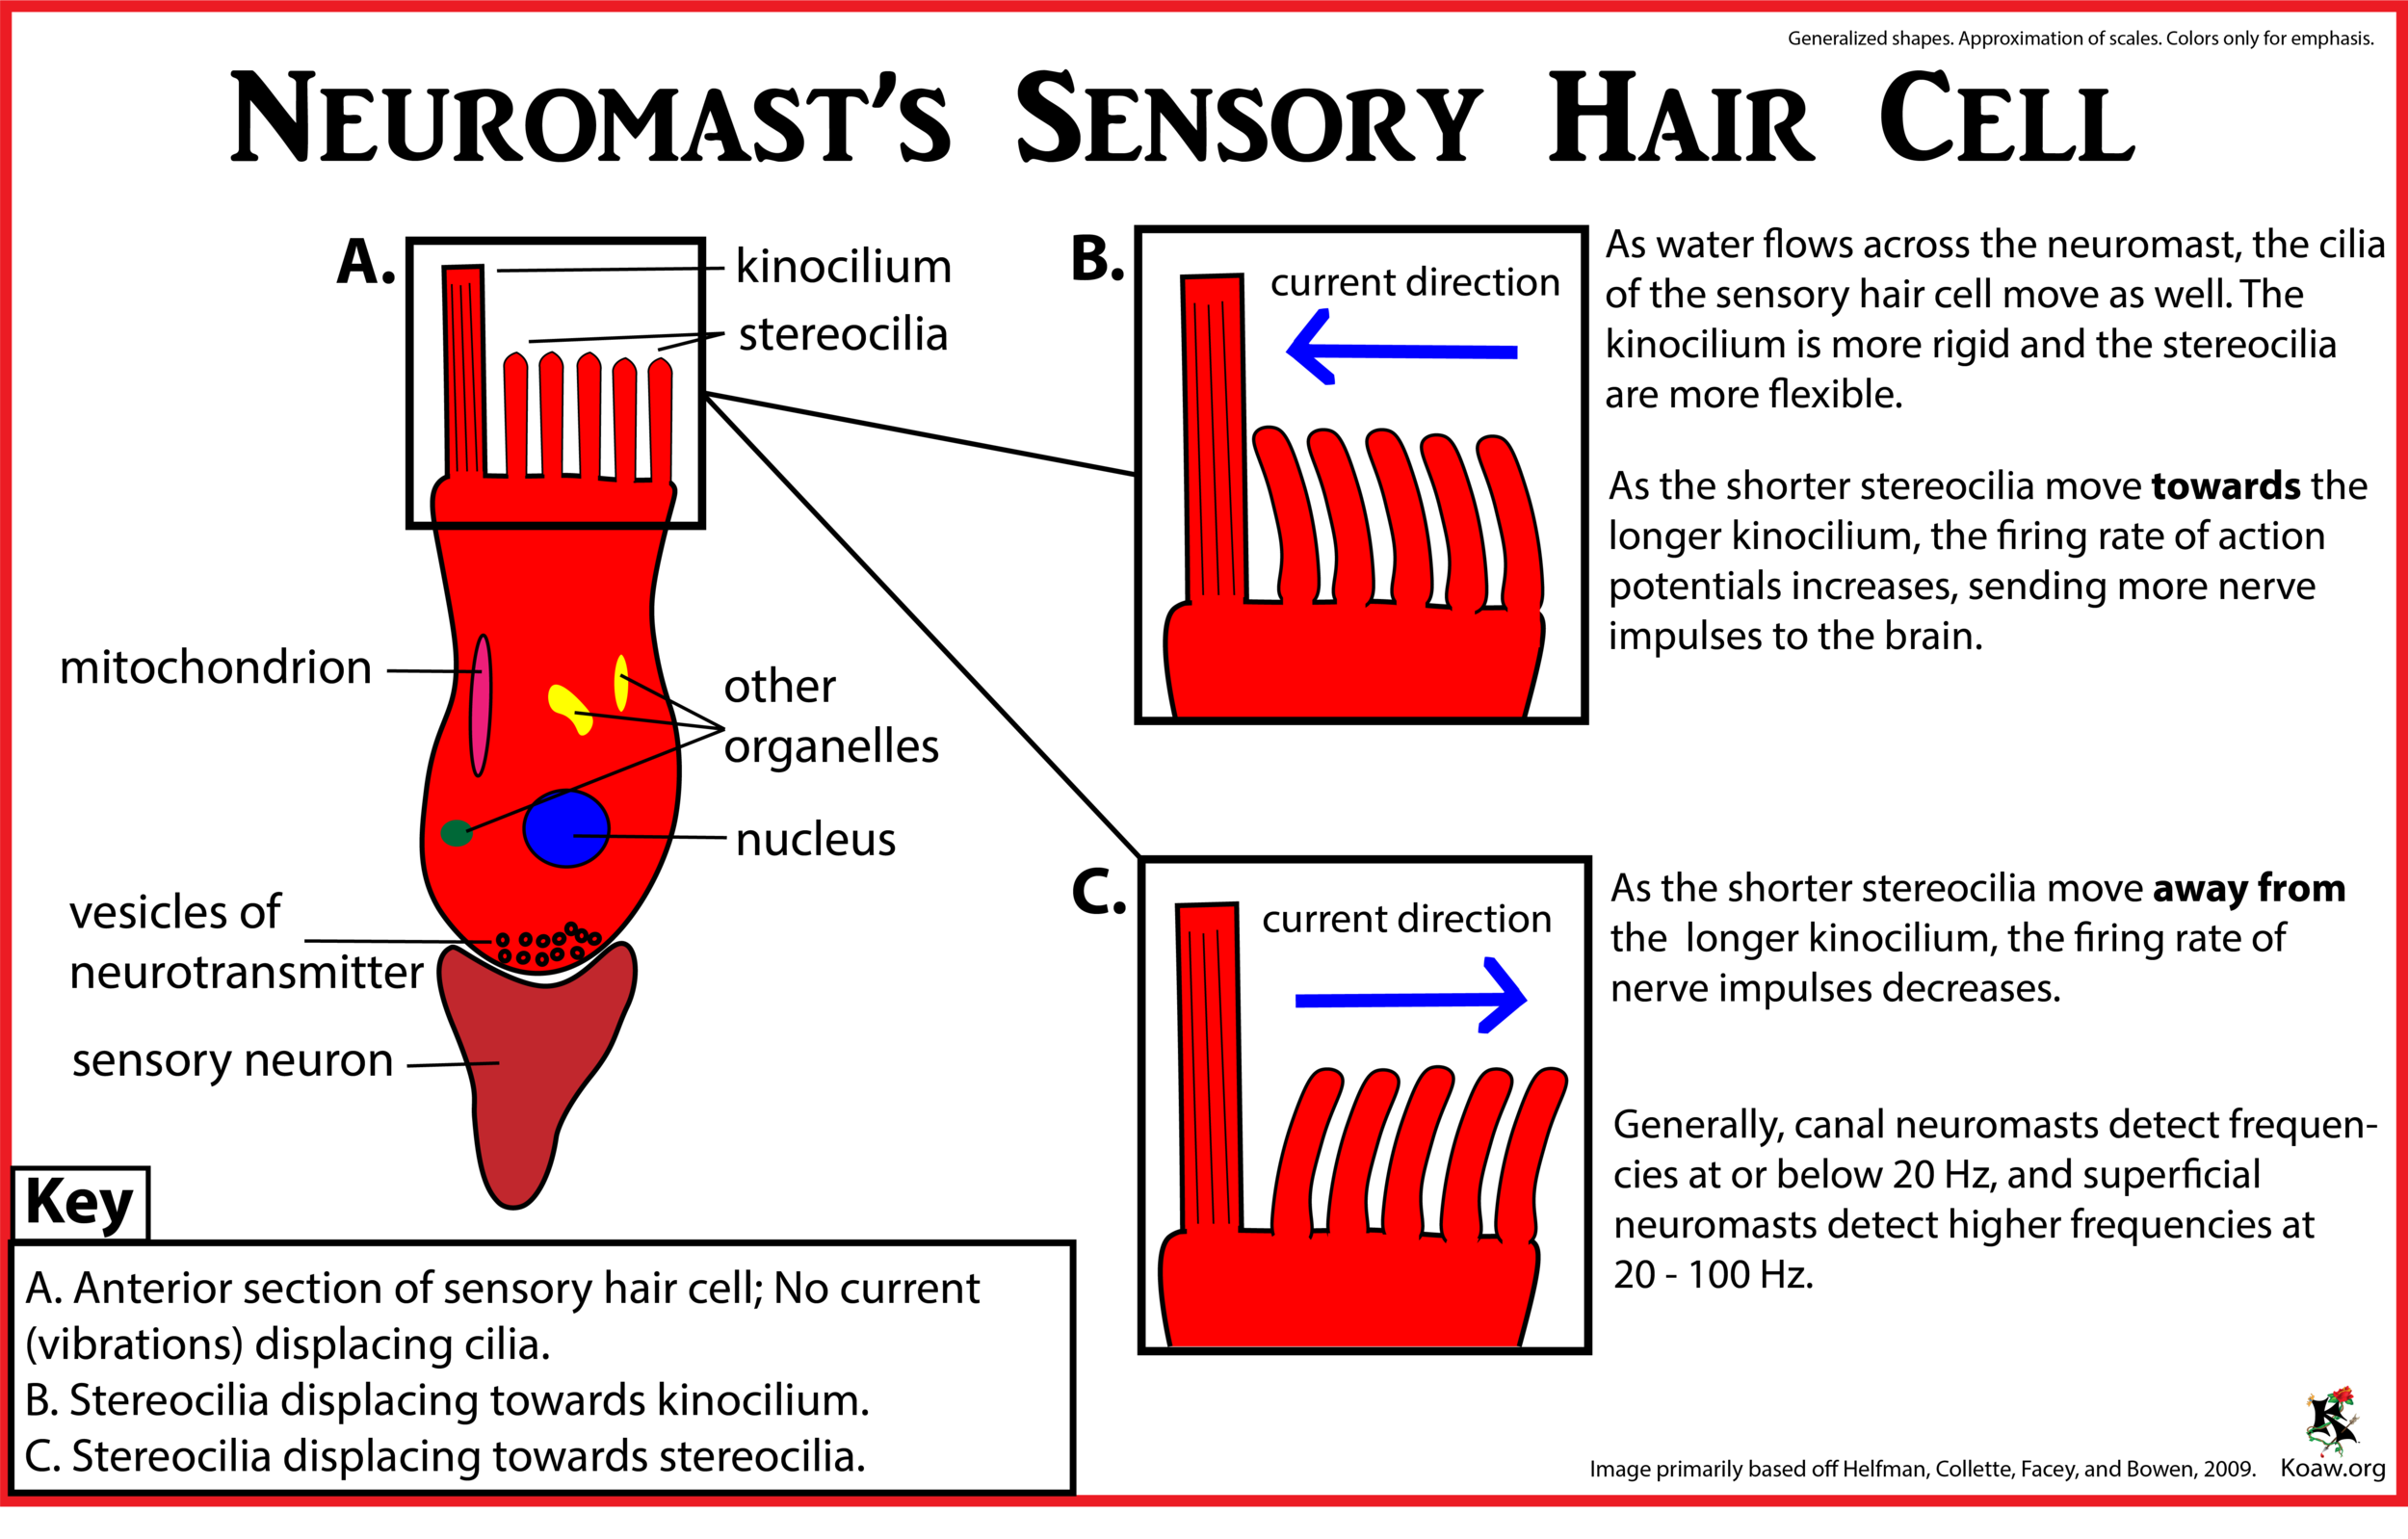 Sensory Hair of Cell of a Neuromast